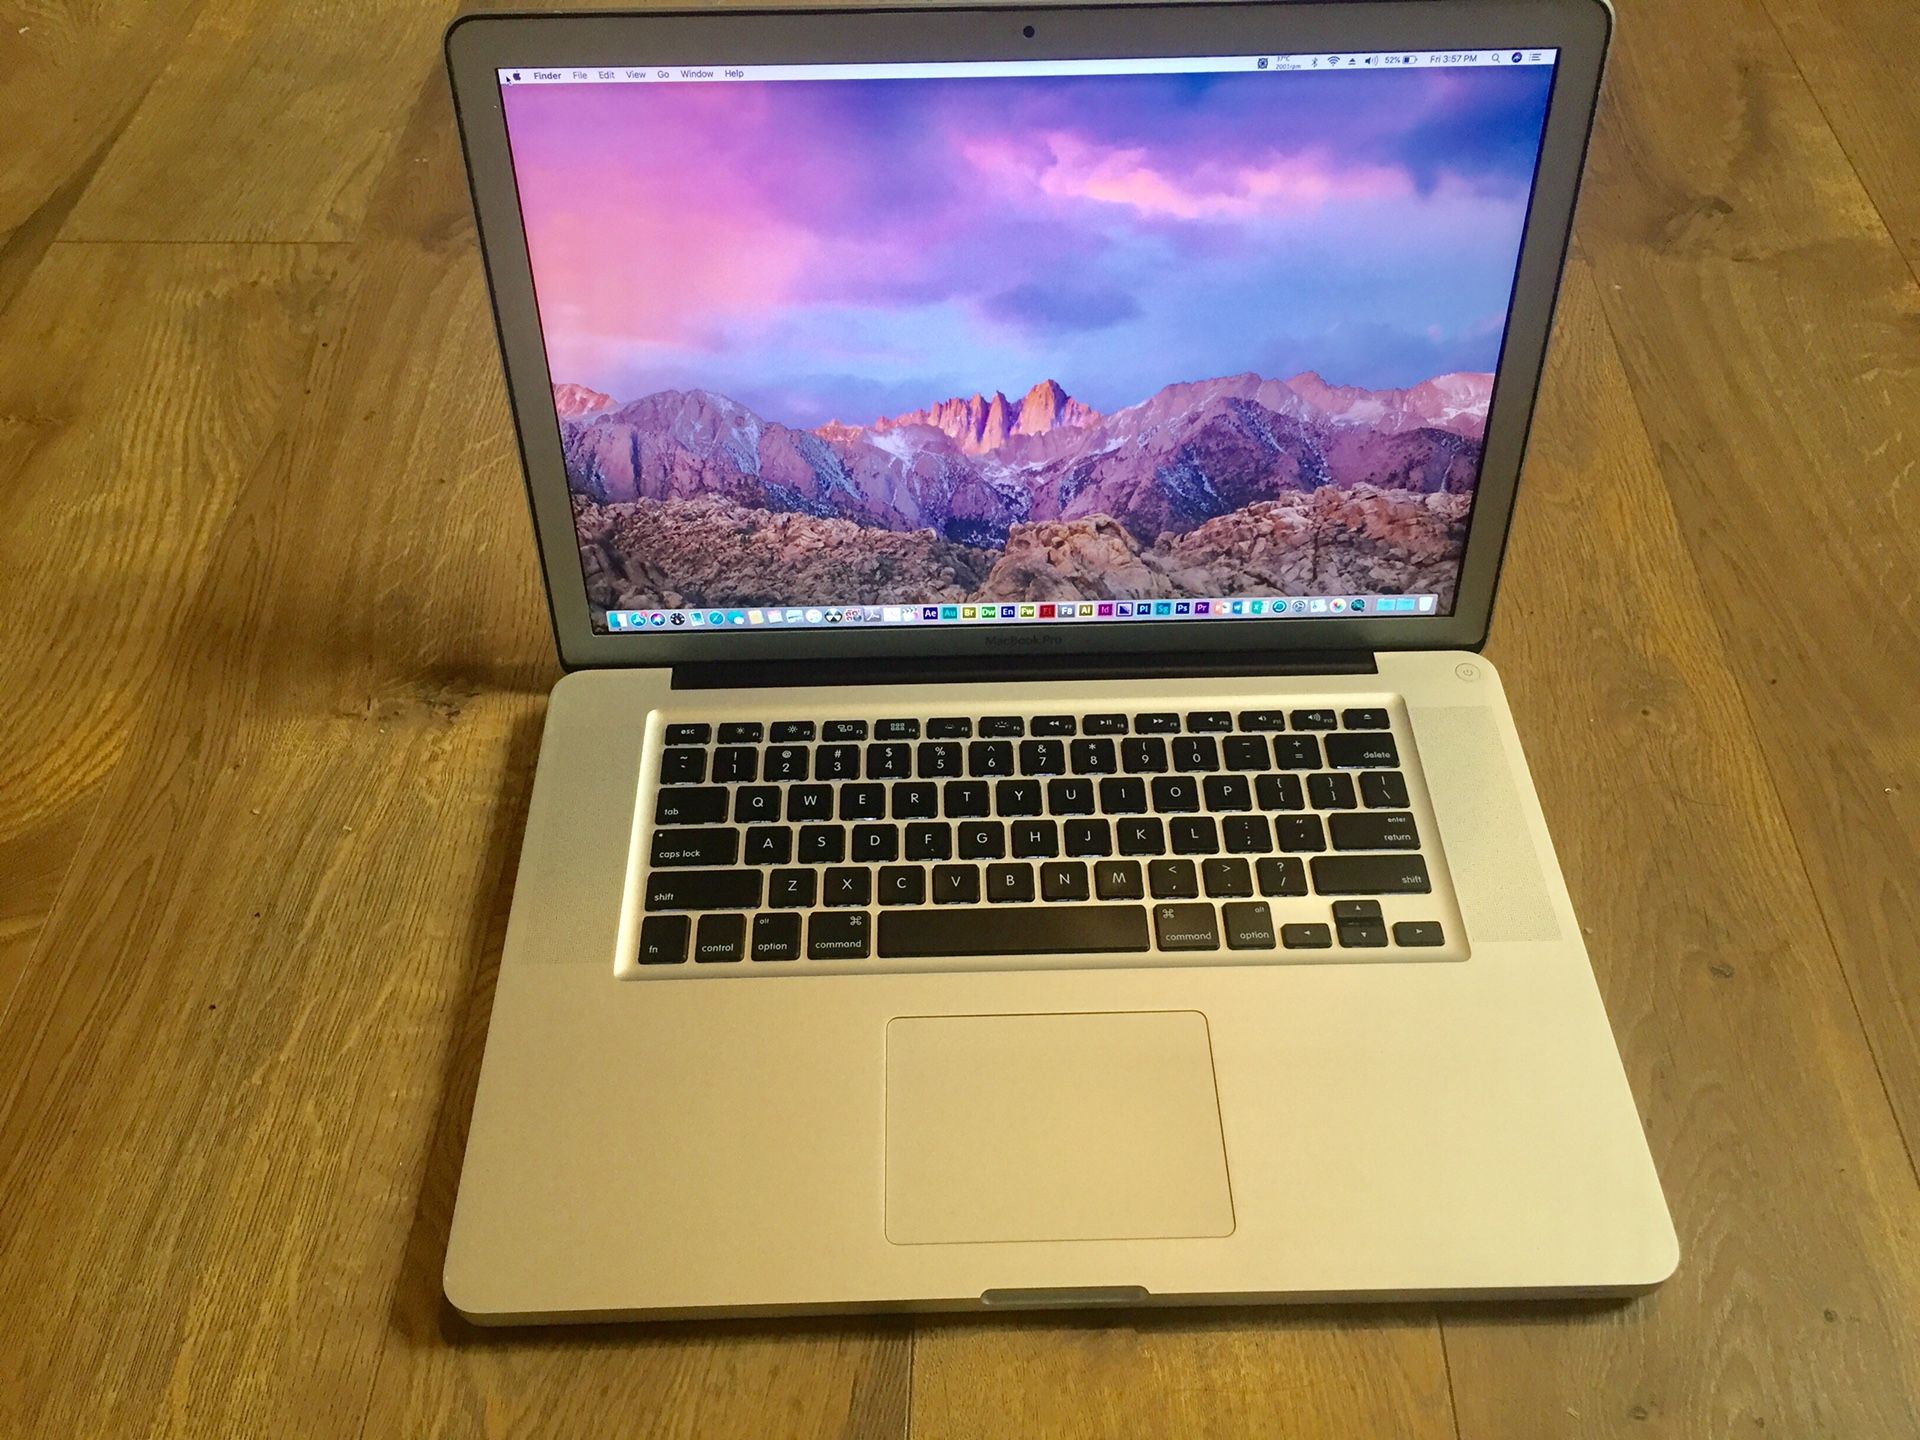 MacBook Pro 15.4” Quadcore i7 Loaded with Audio, Photo and Video Editing Software